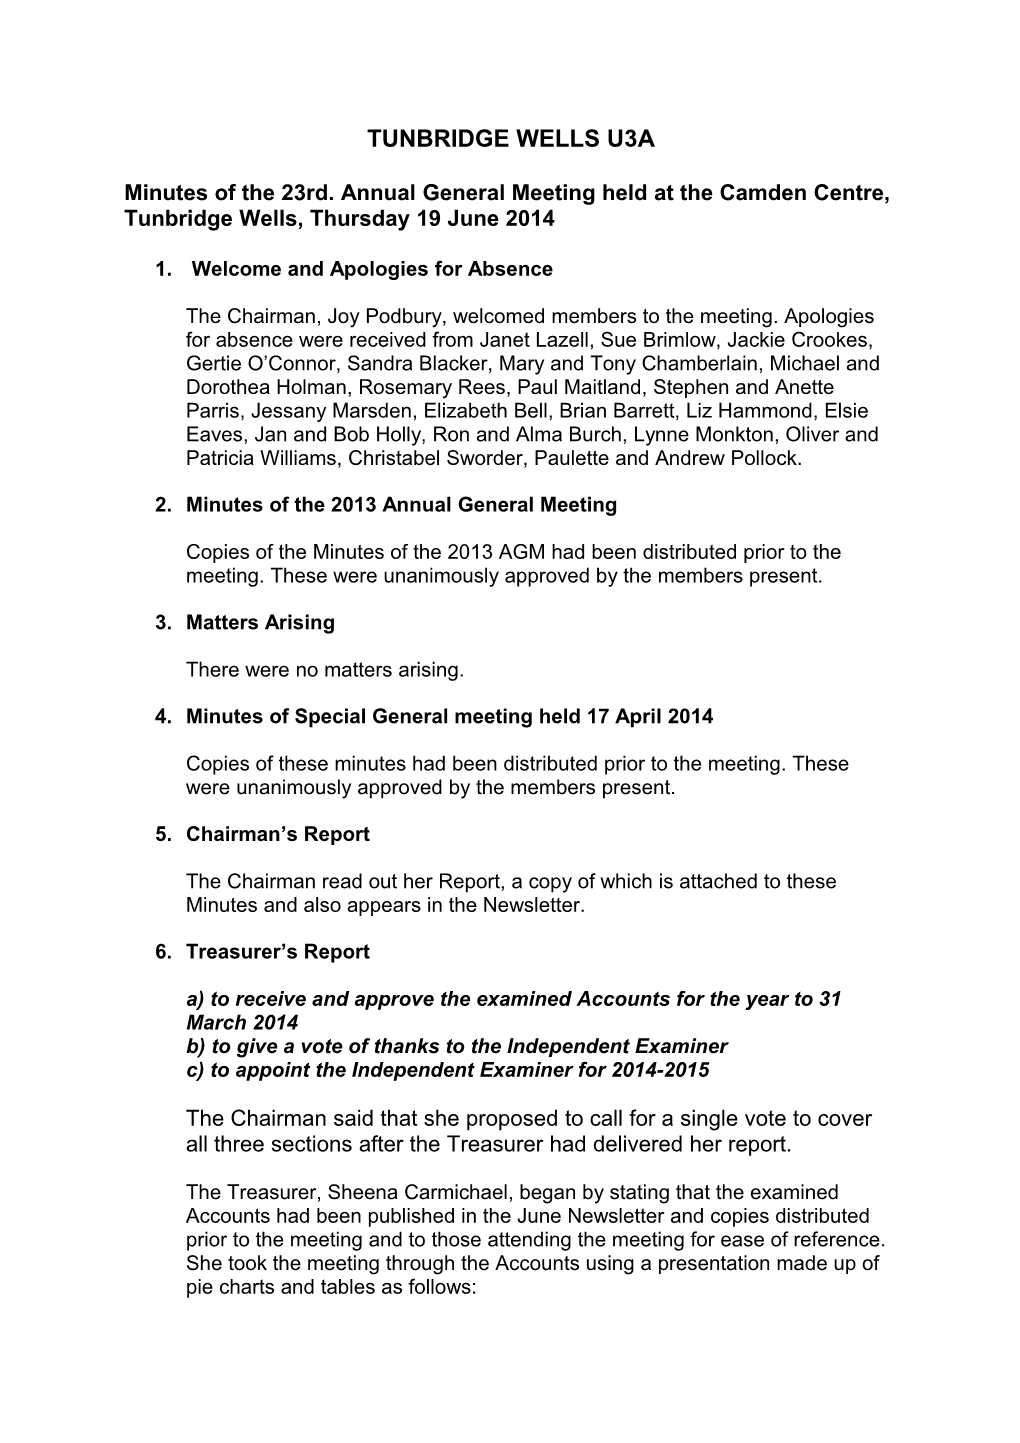 Minutes of the 23Rd. Annual General Meeting Held at the Camden Centre